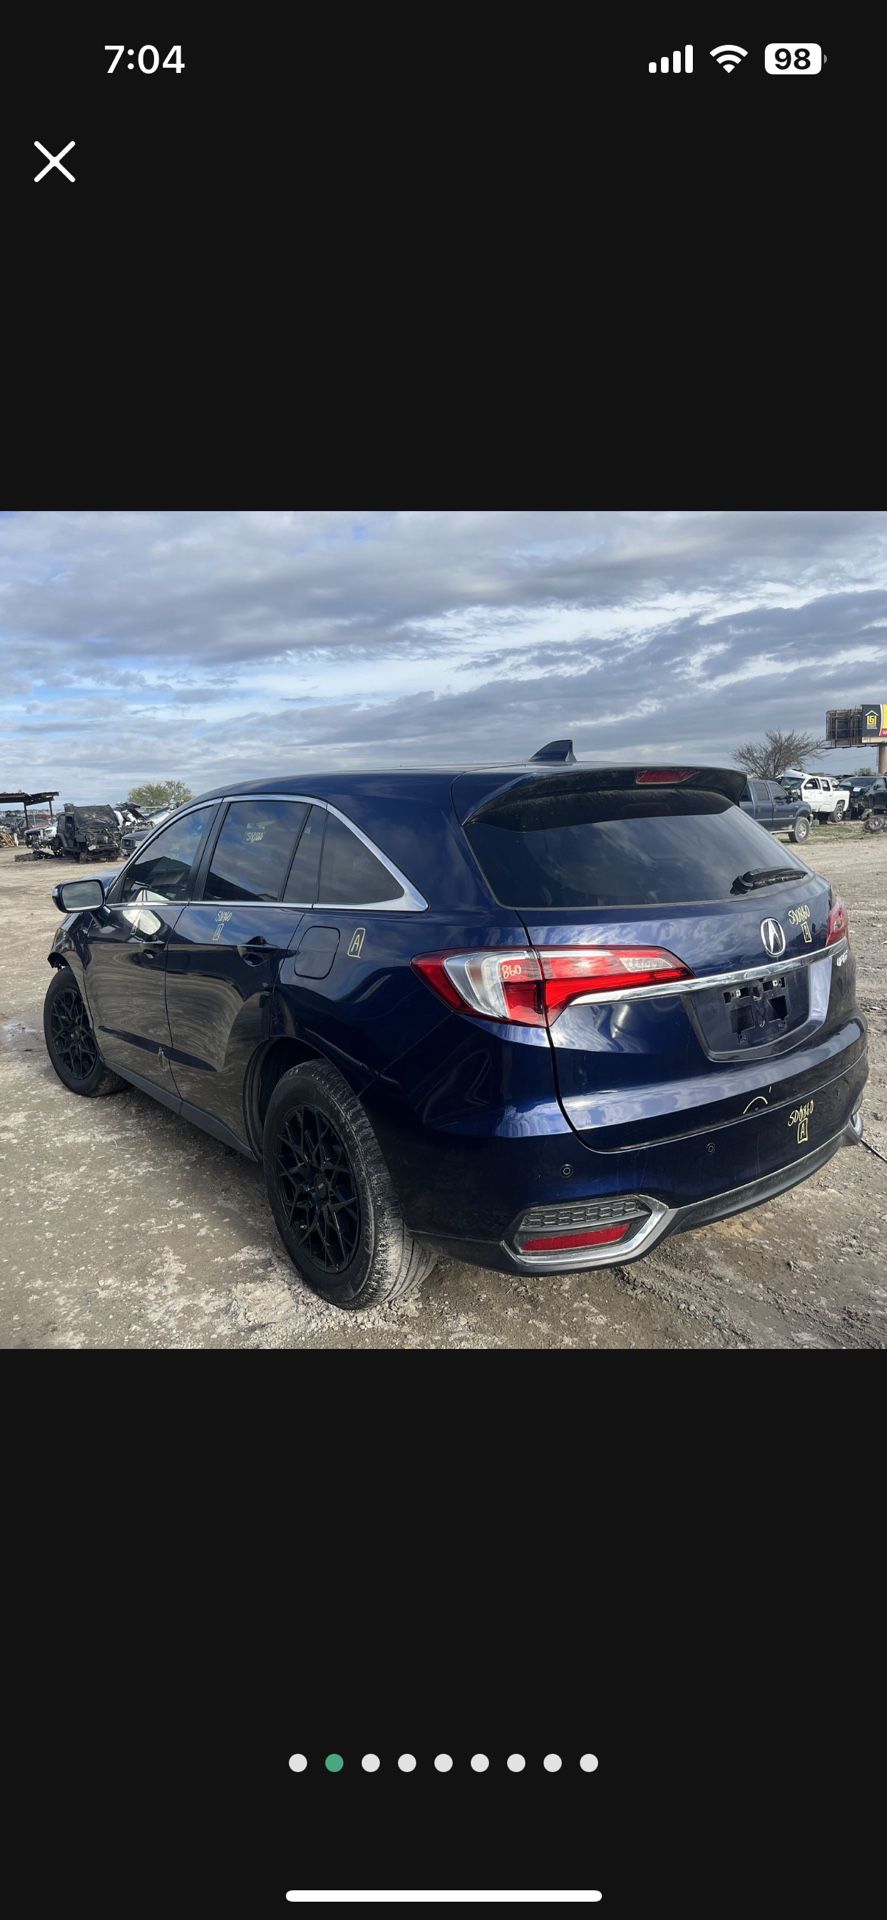 2017 Acura RDX For Parts Only